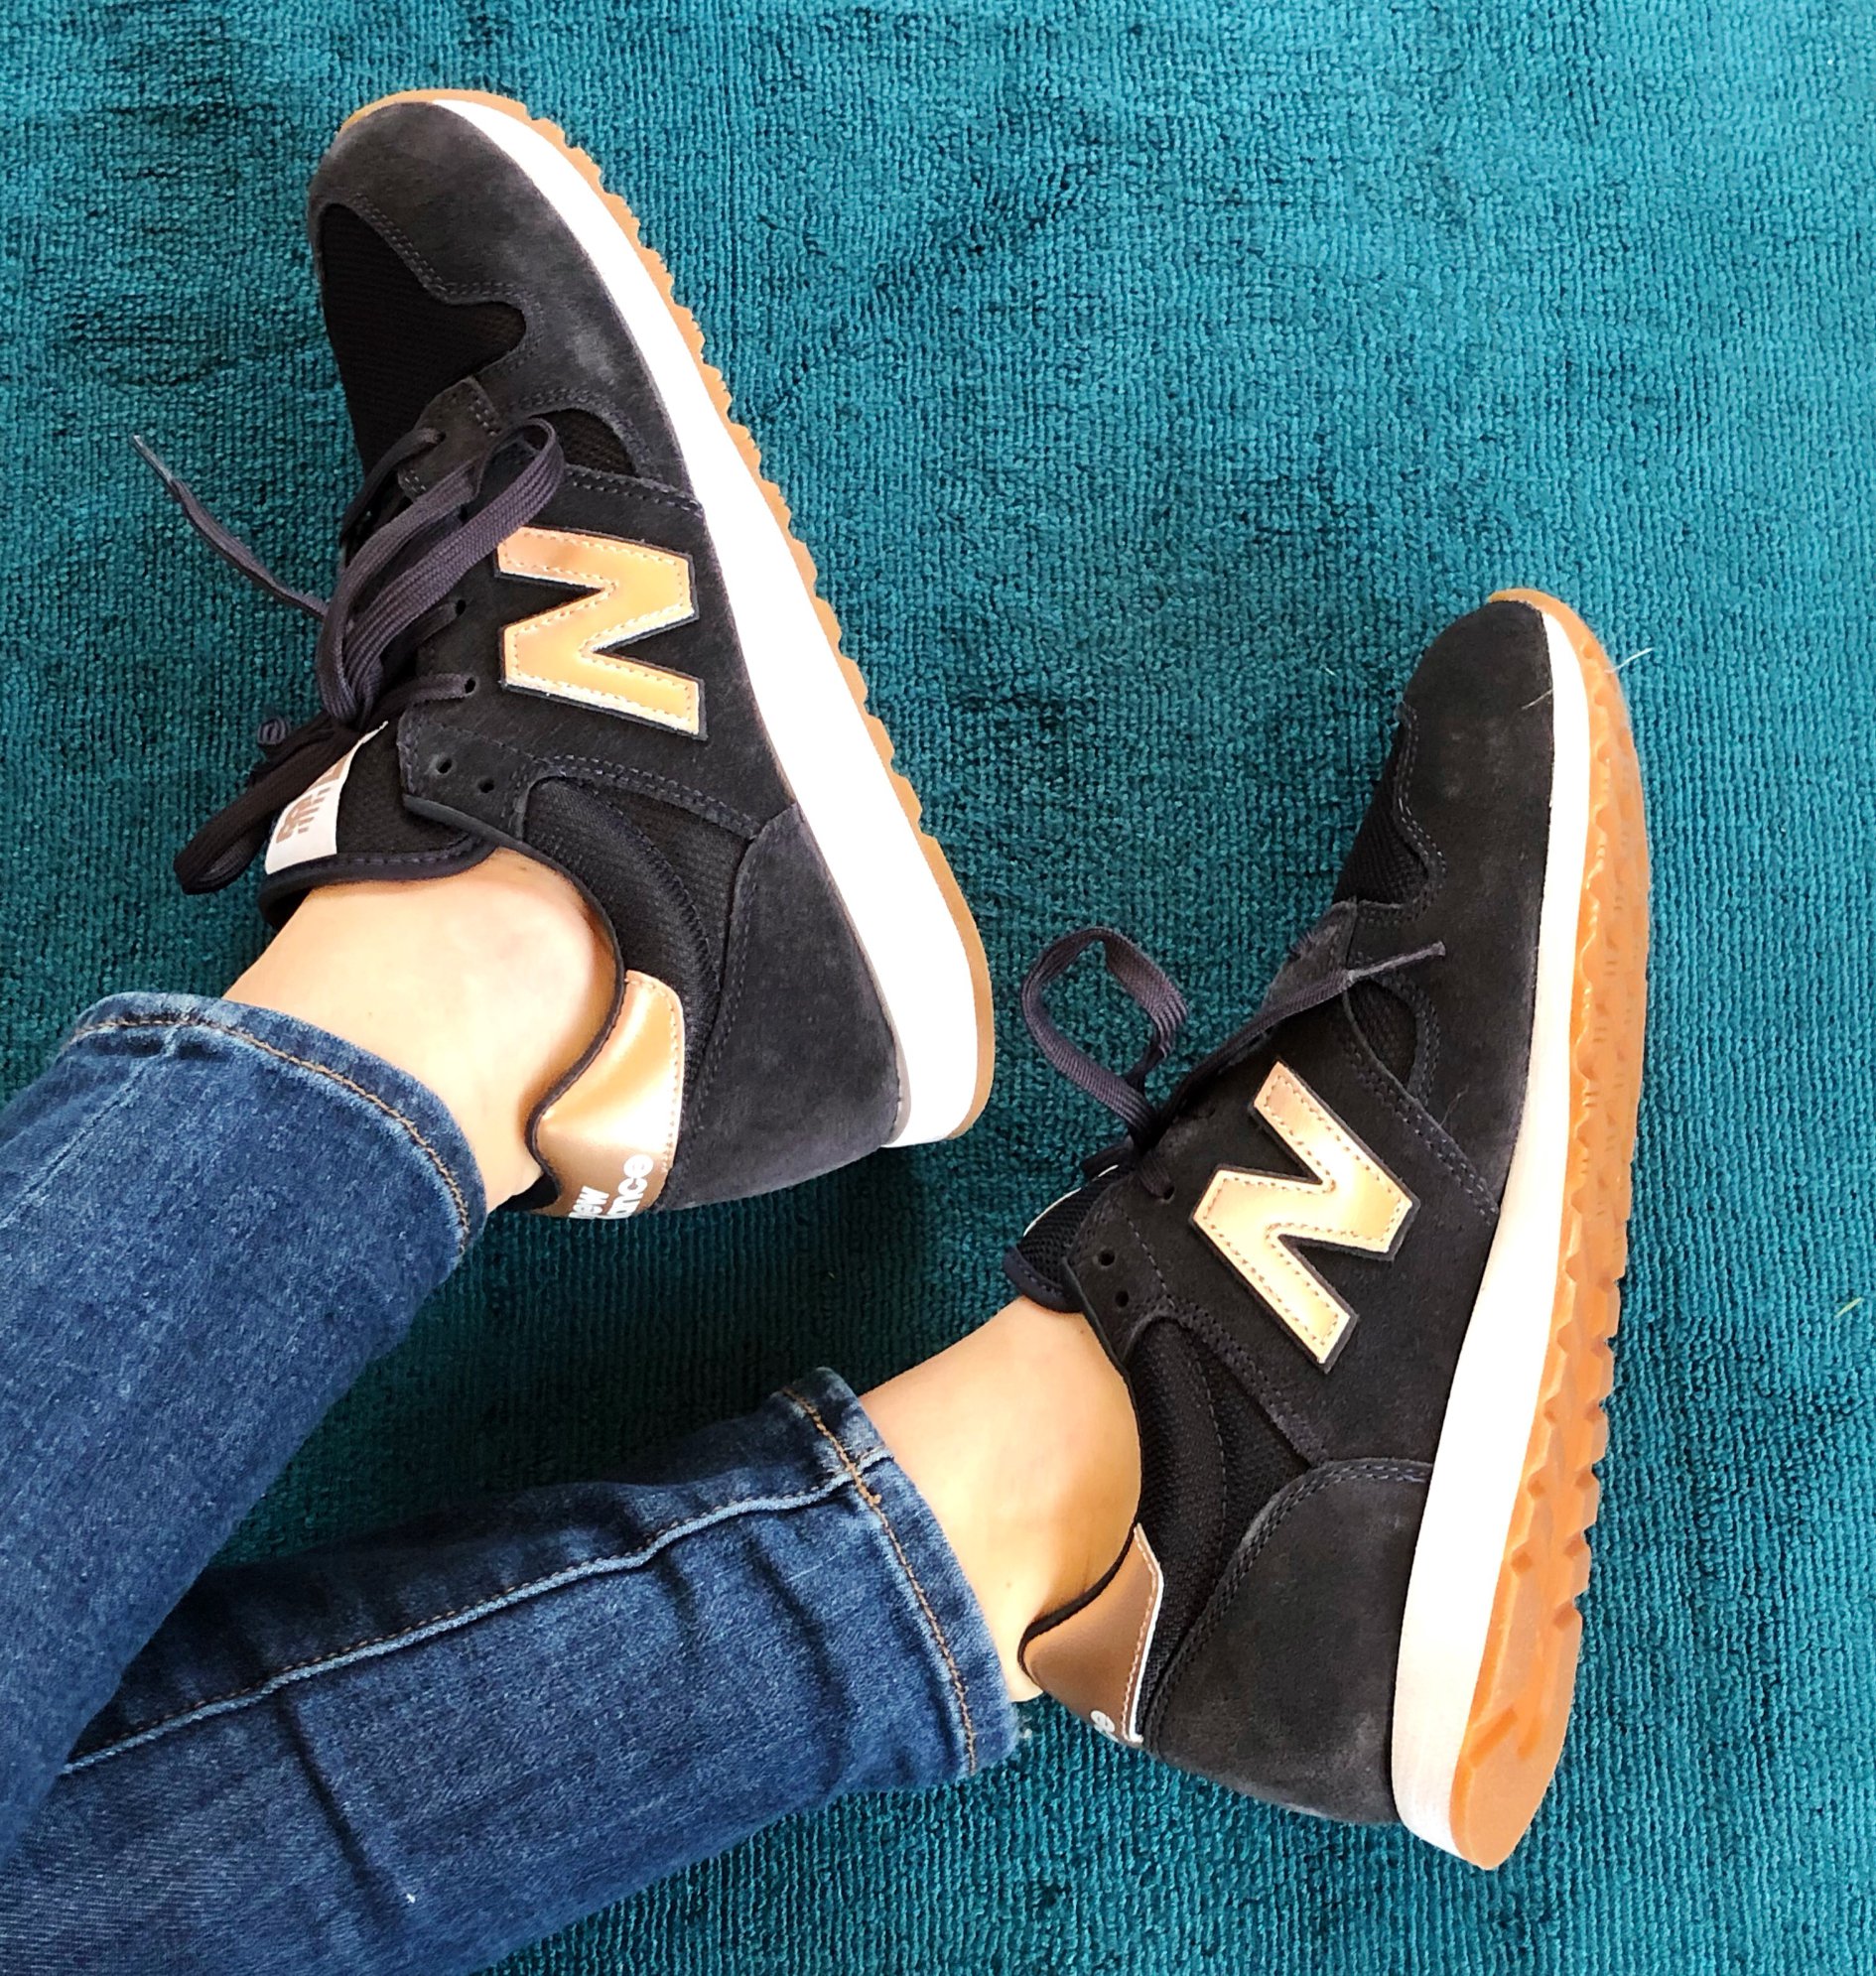 Comfortable Sneakers // Comfy Walking Shoes // Cute Sneakers // Walking Shoes // Spring Shoes // New Balance Sneakers